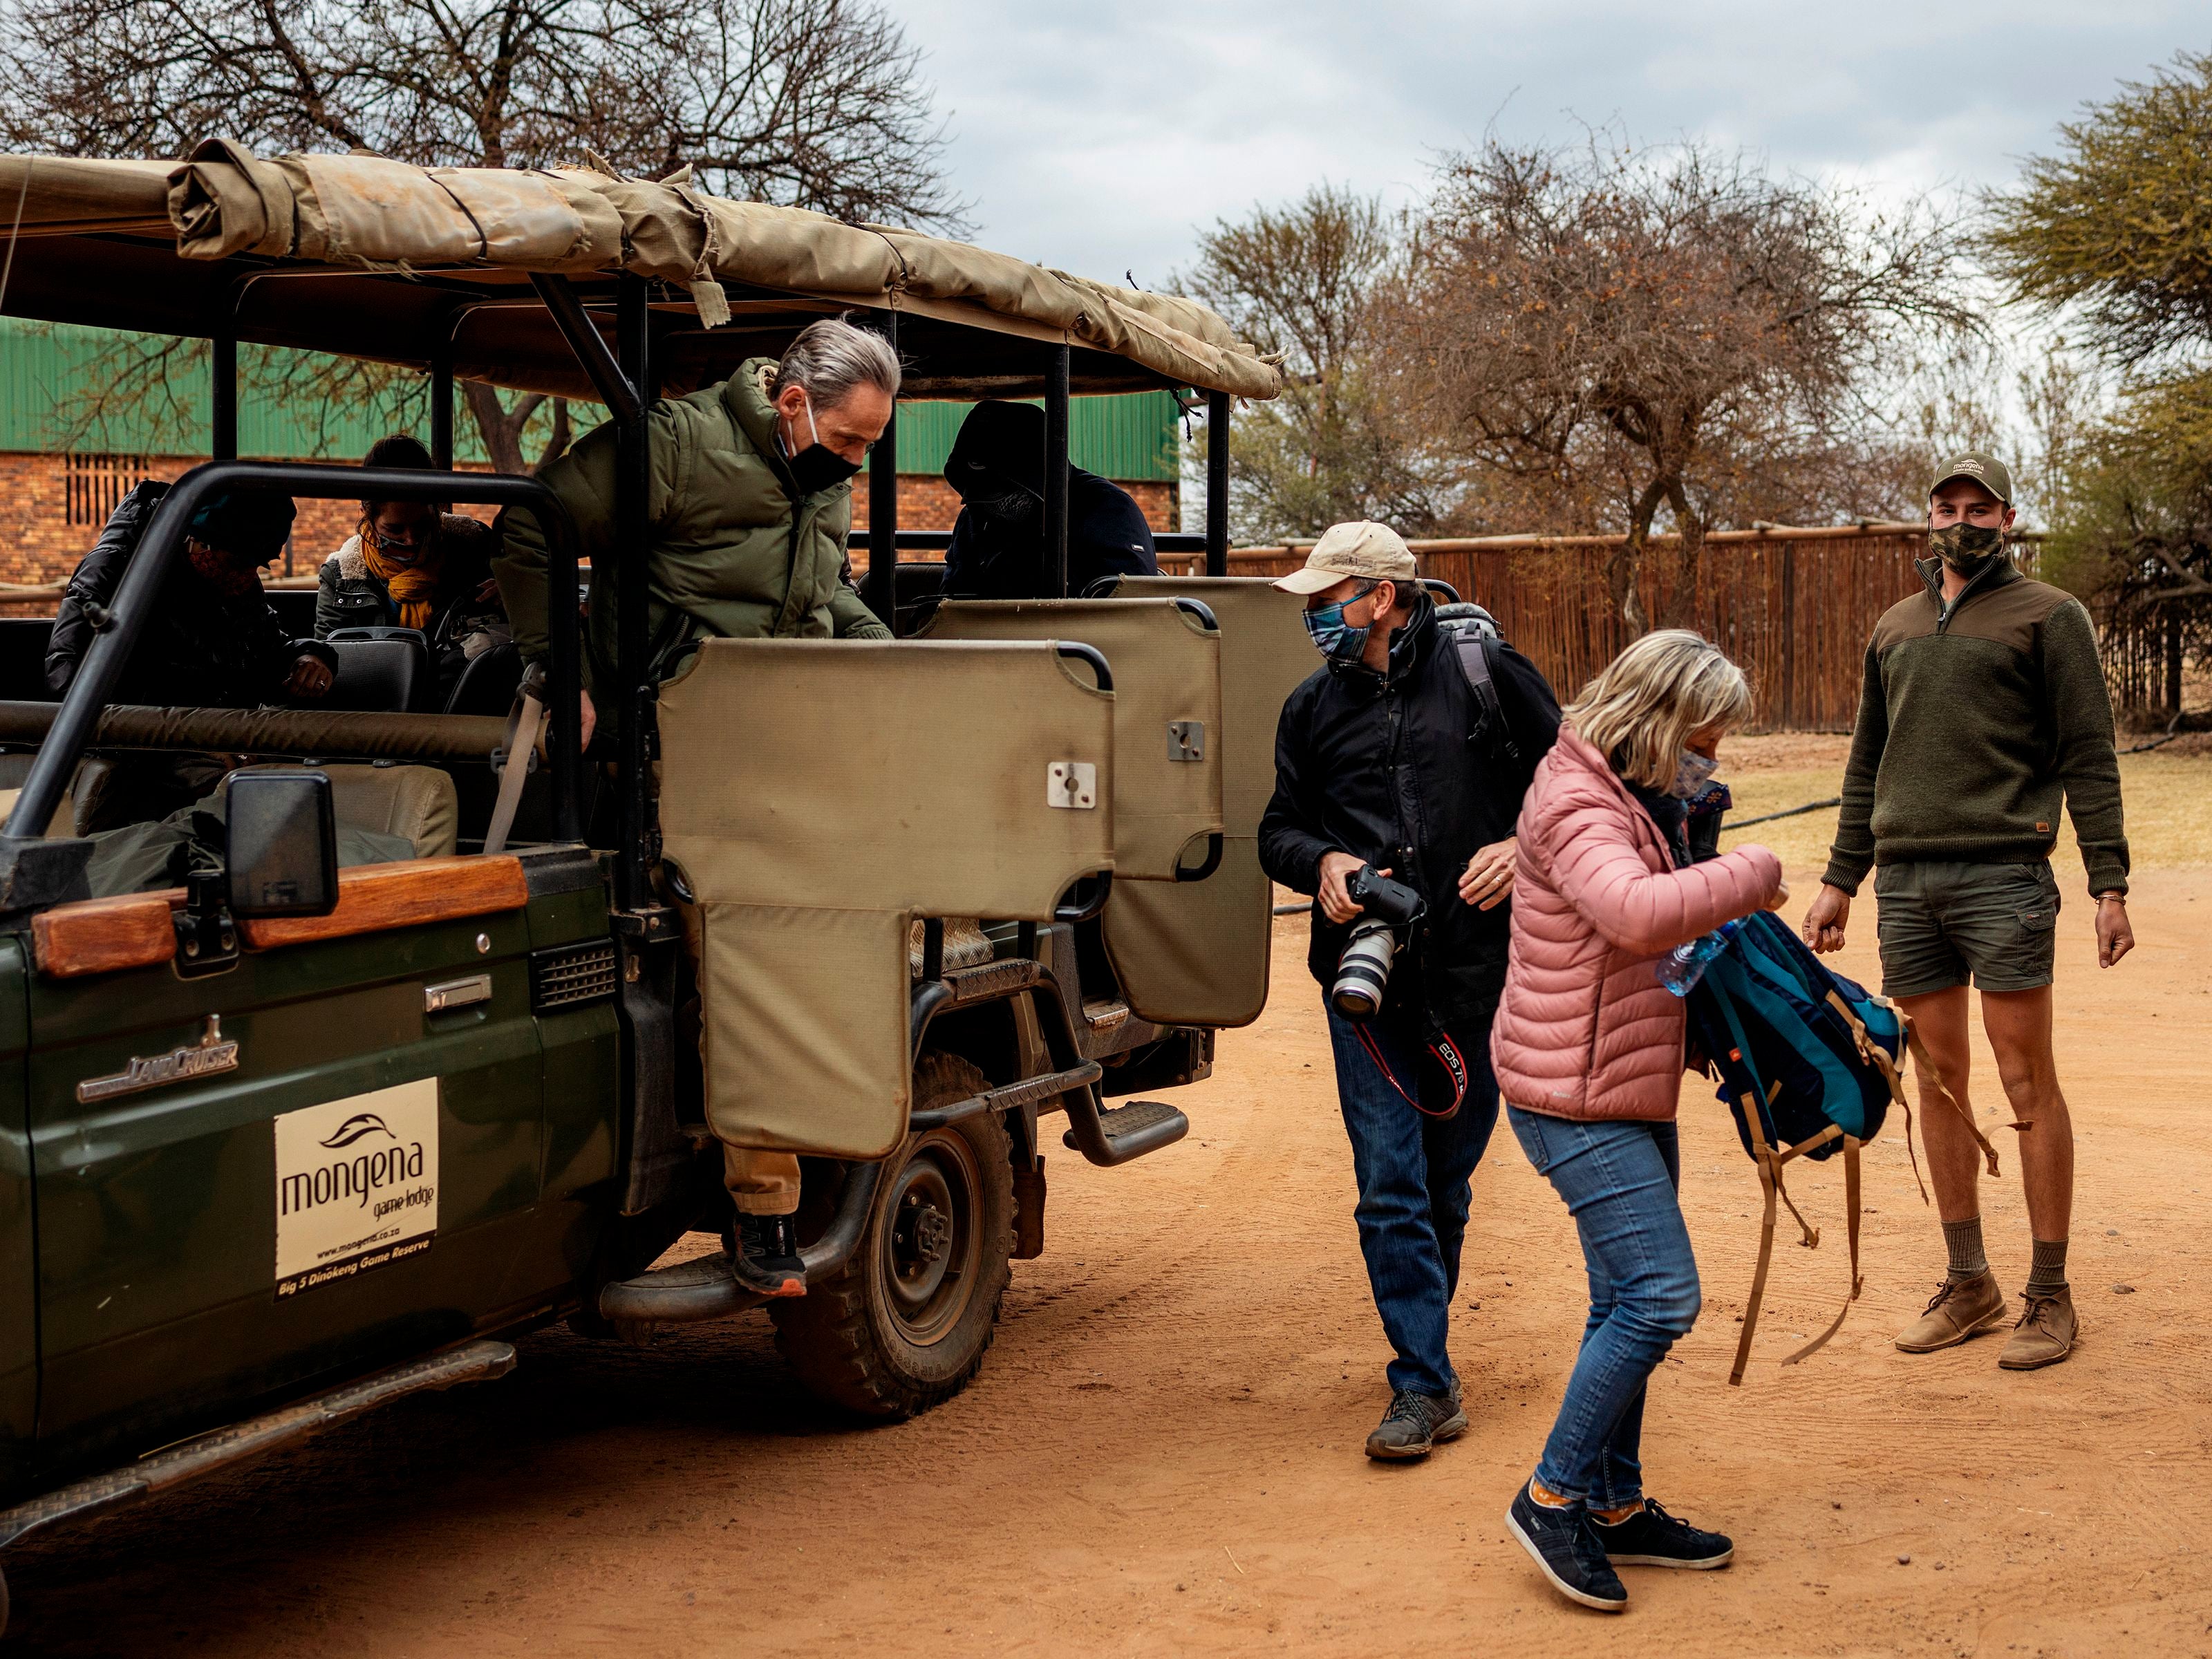 Tourists wearing face masks during a guided safari tour near Pretoria, South Africa